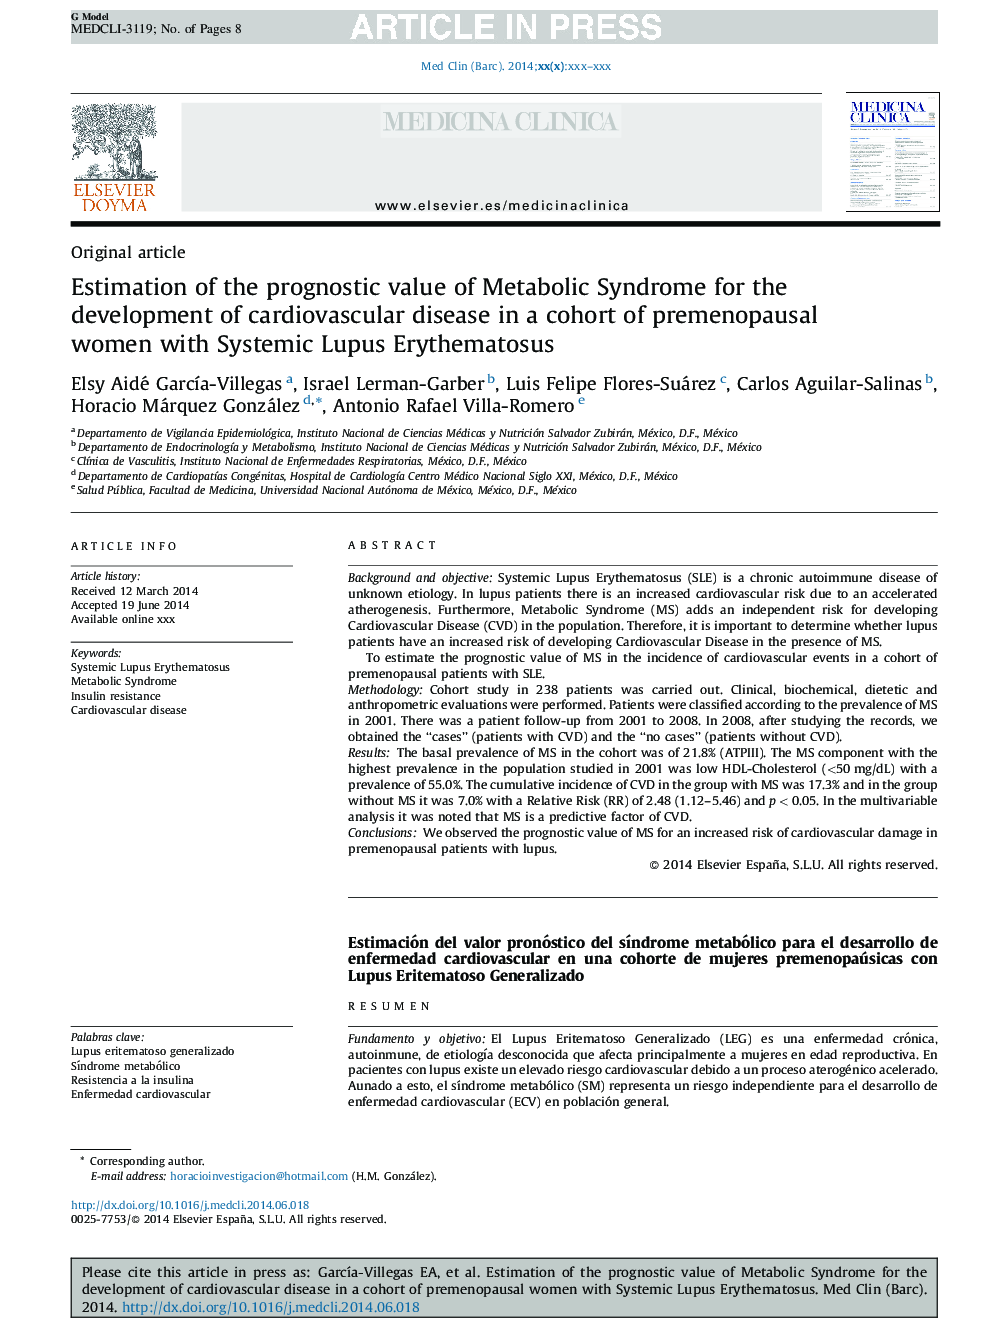 Prognostic value of metabolic syndrome for the development of cardiovascular disease in a cohort of premenopausal women with systemic lupus erythematosus